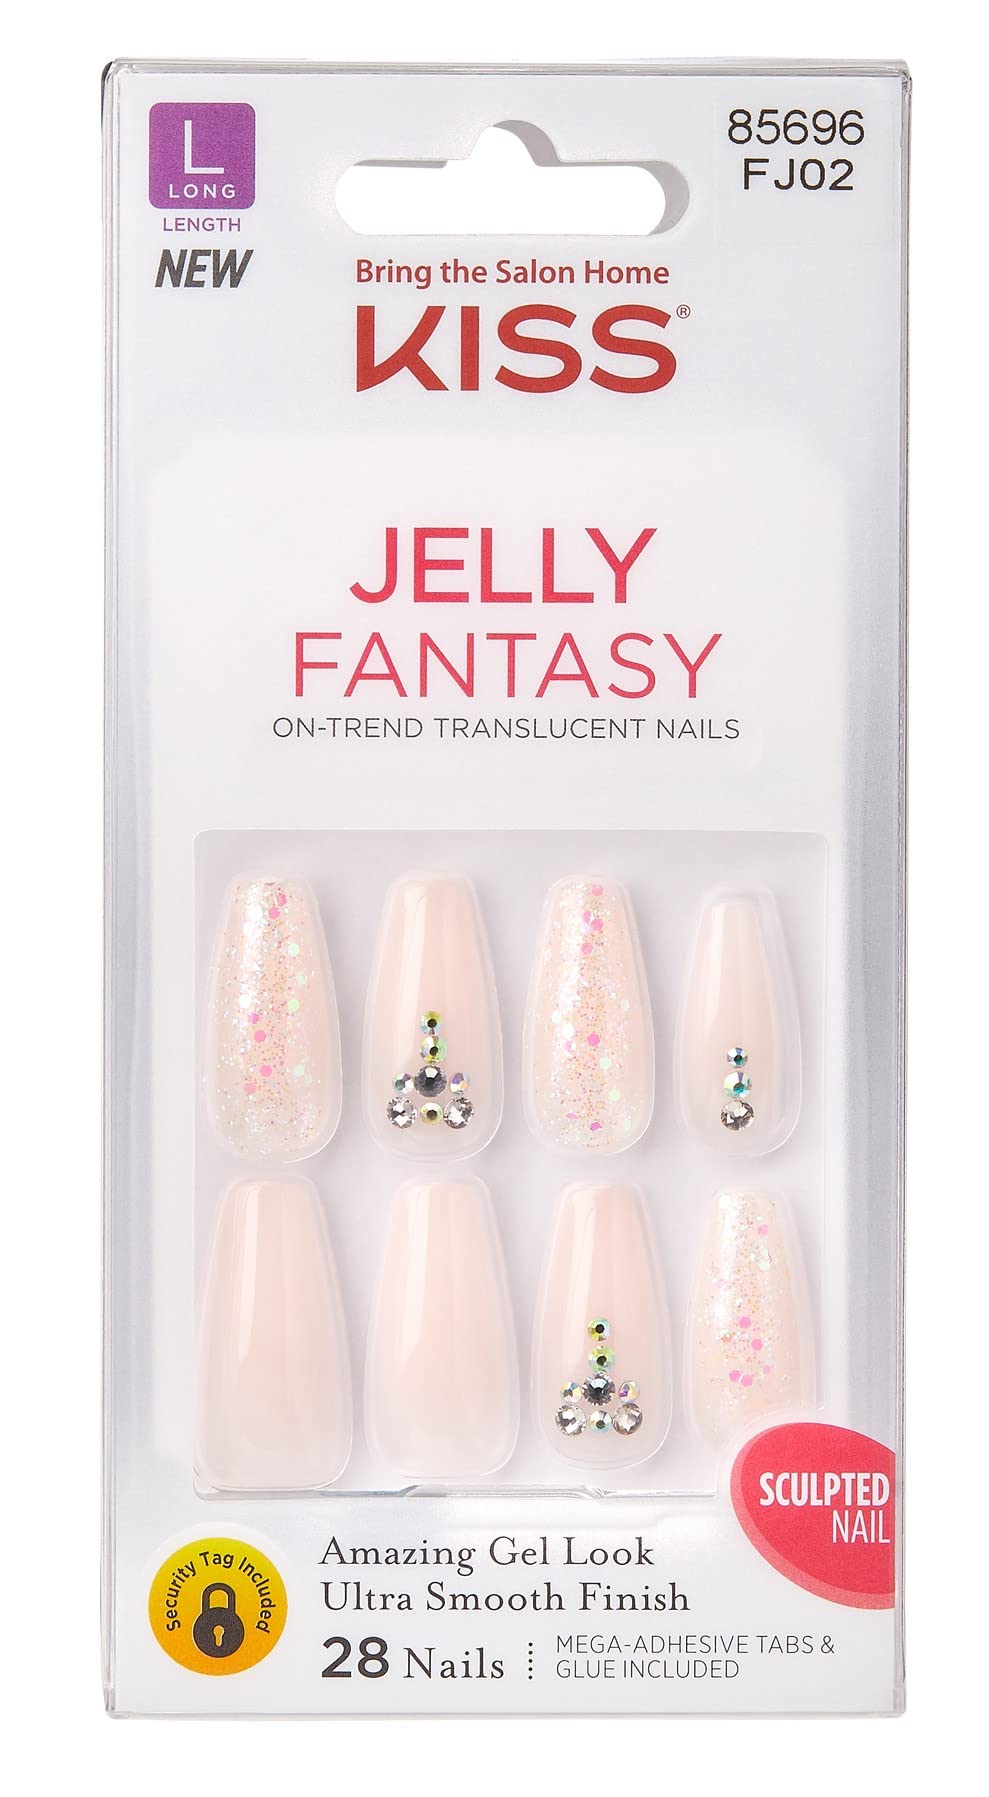 Kiss Jelly Fantasy 28 Count Light Pink/Glitter Long Length (Pack of 2)